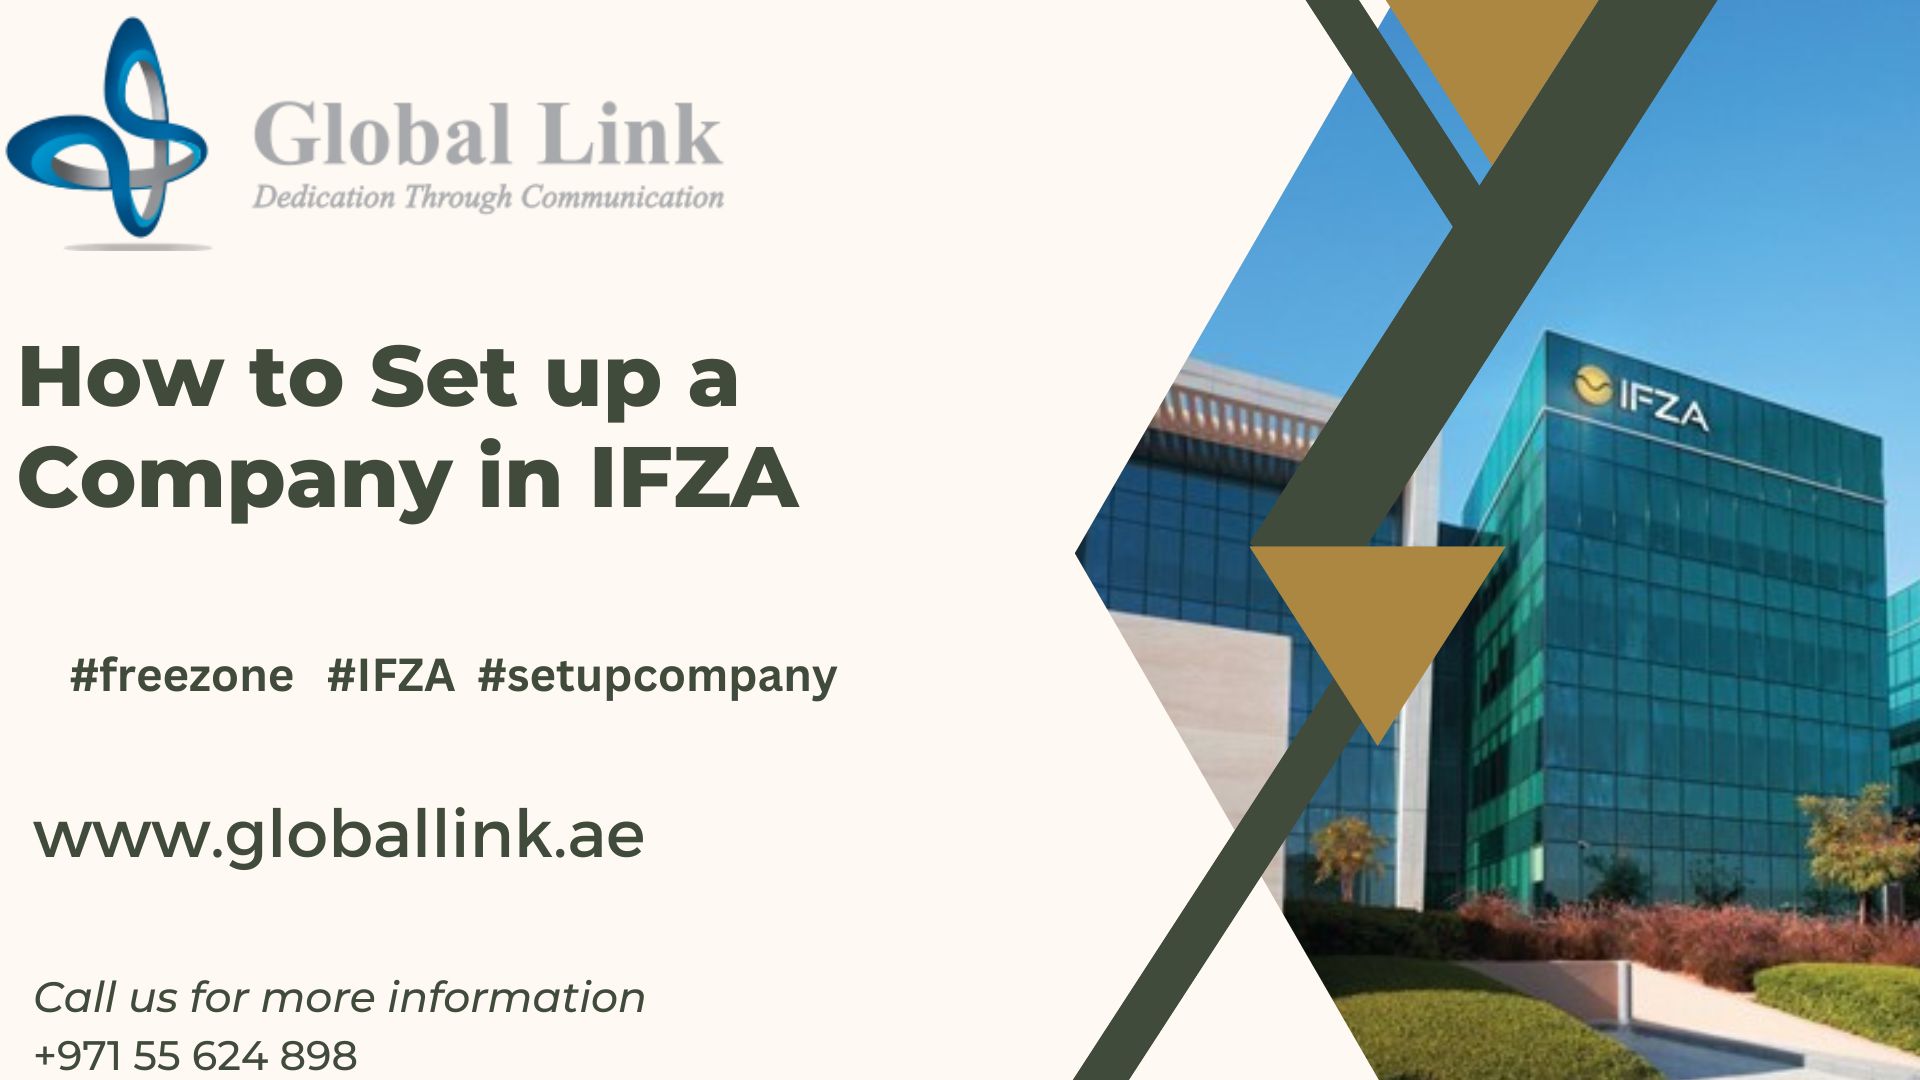 HOW TO SET UP A COMPANY IN IFZA